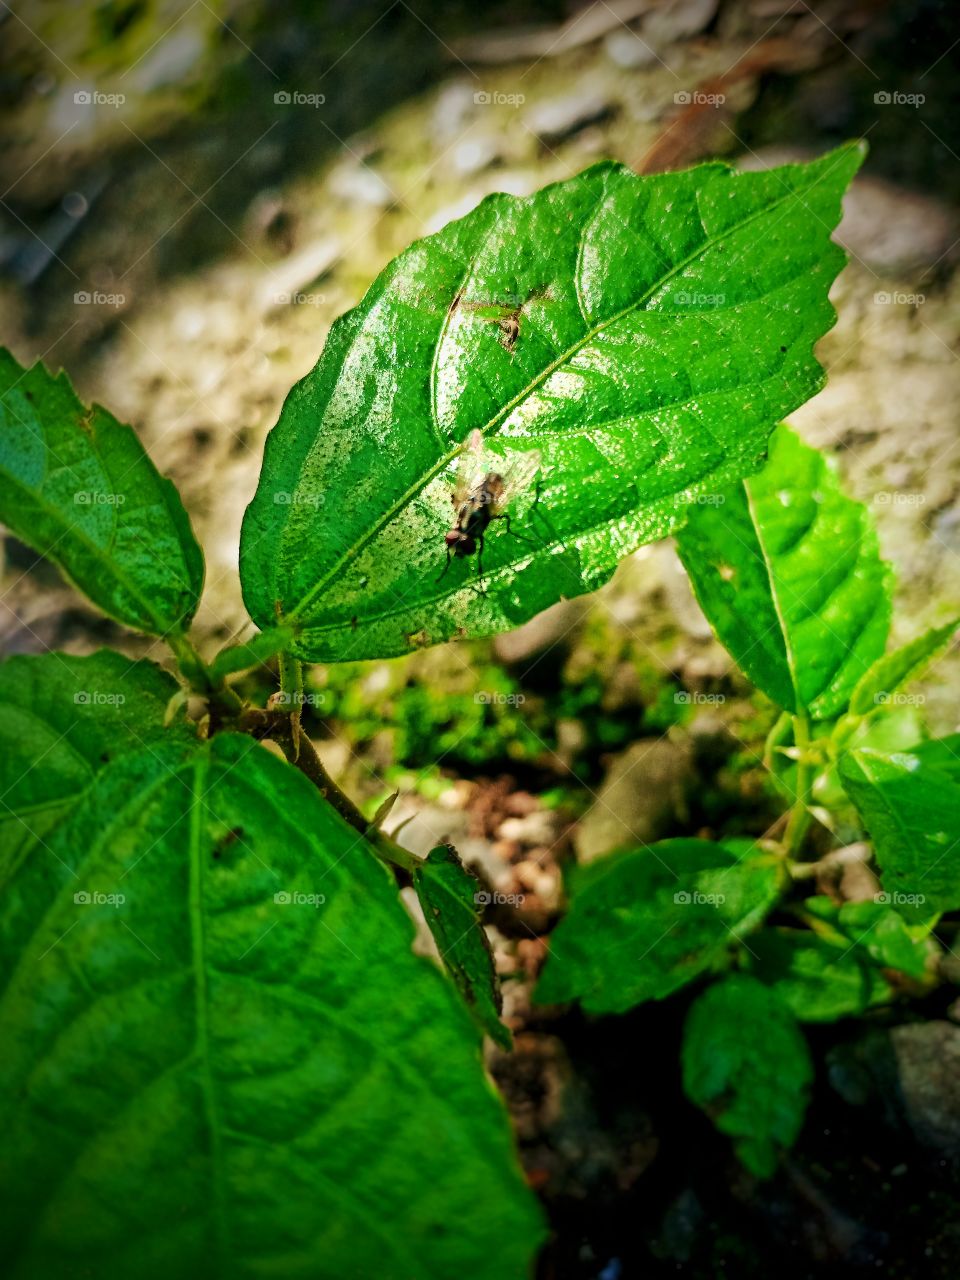 fly eating plant